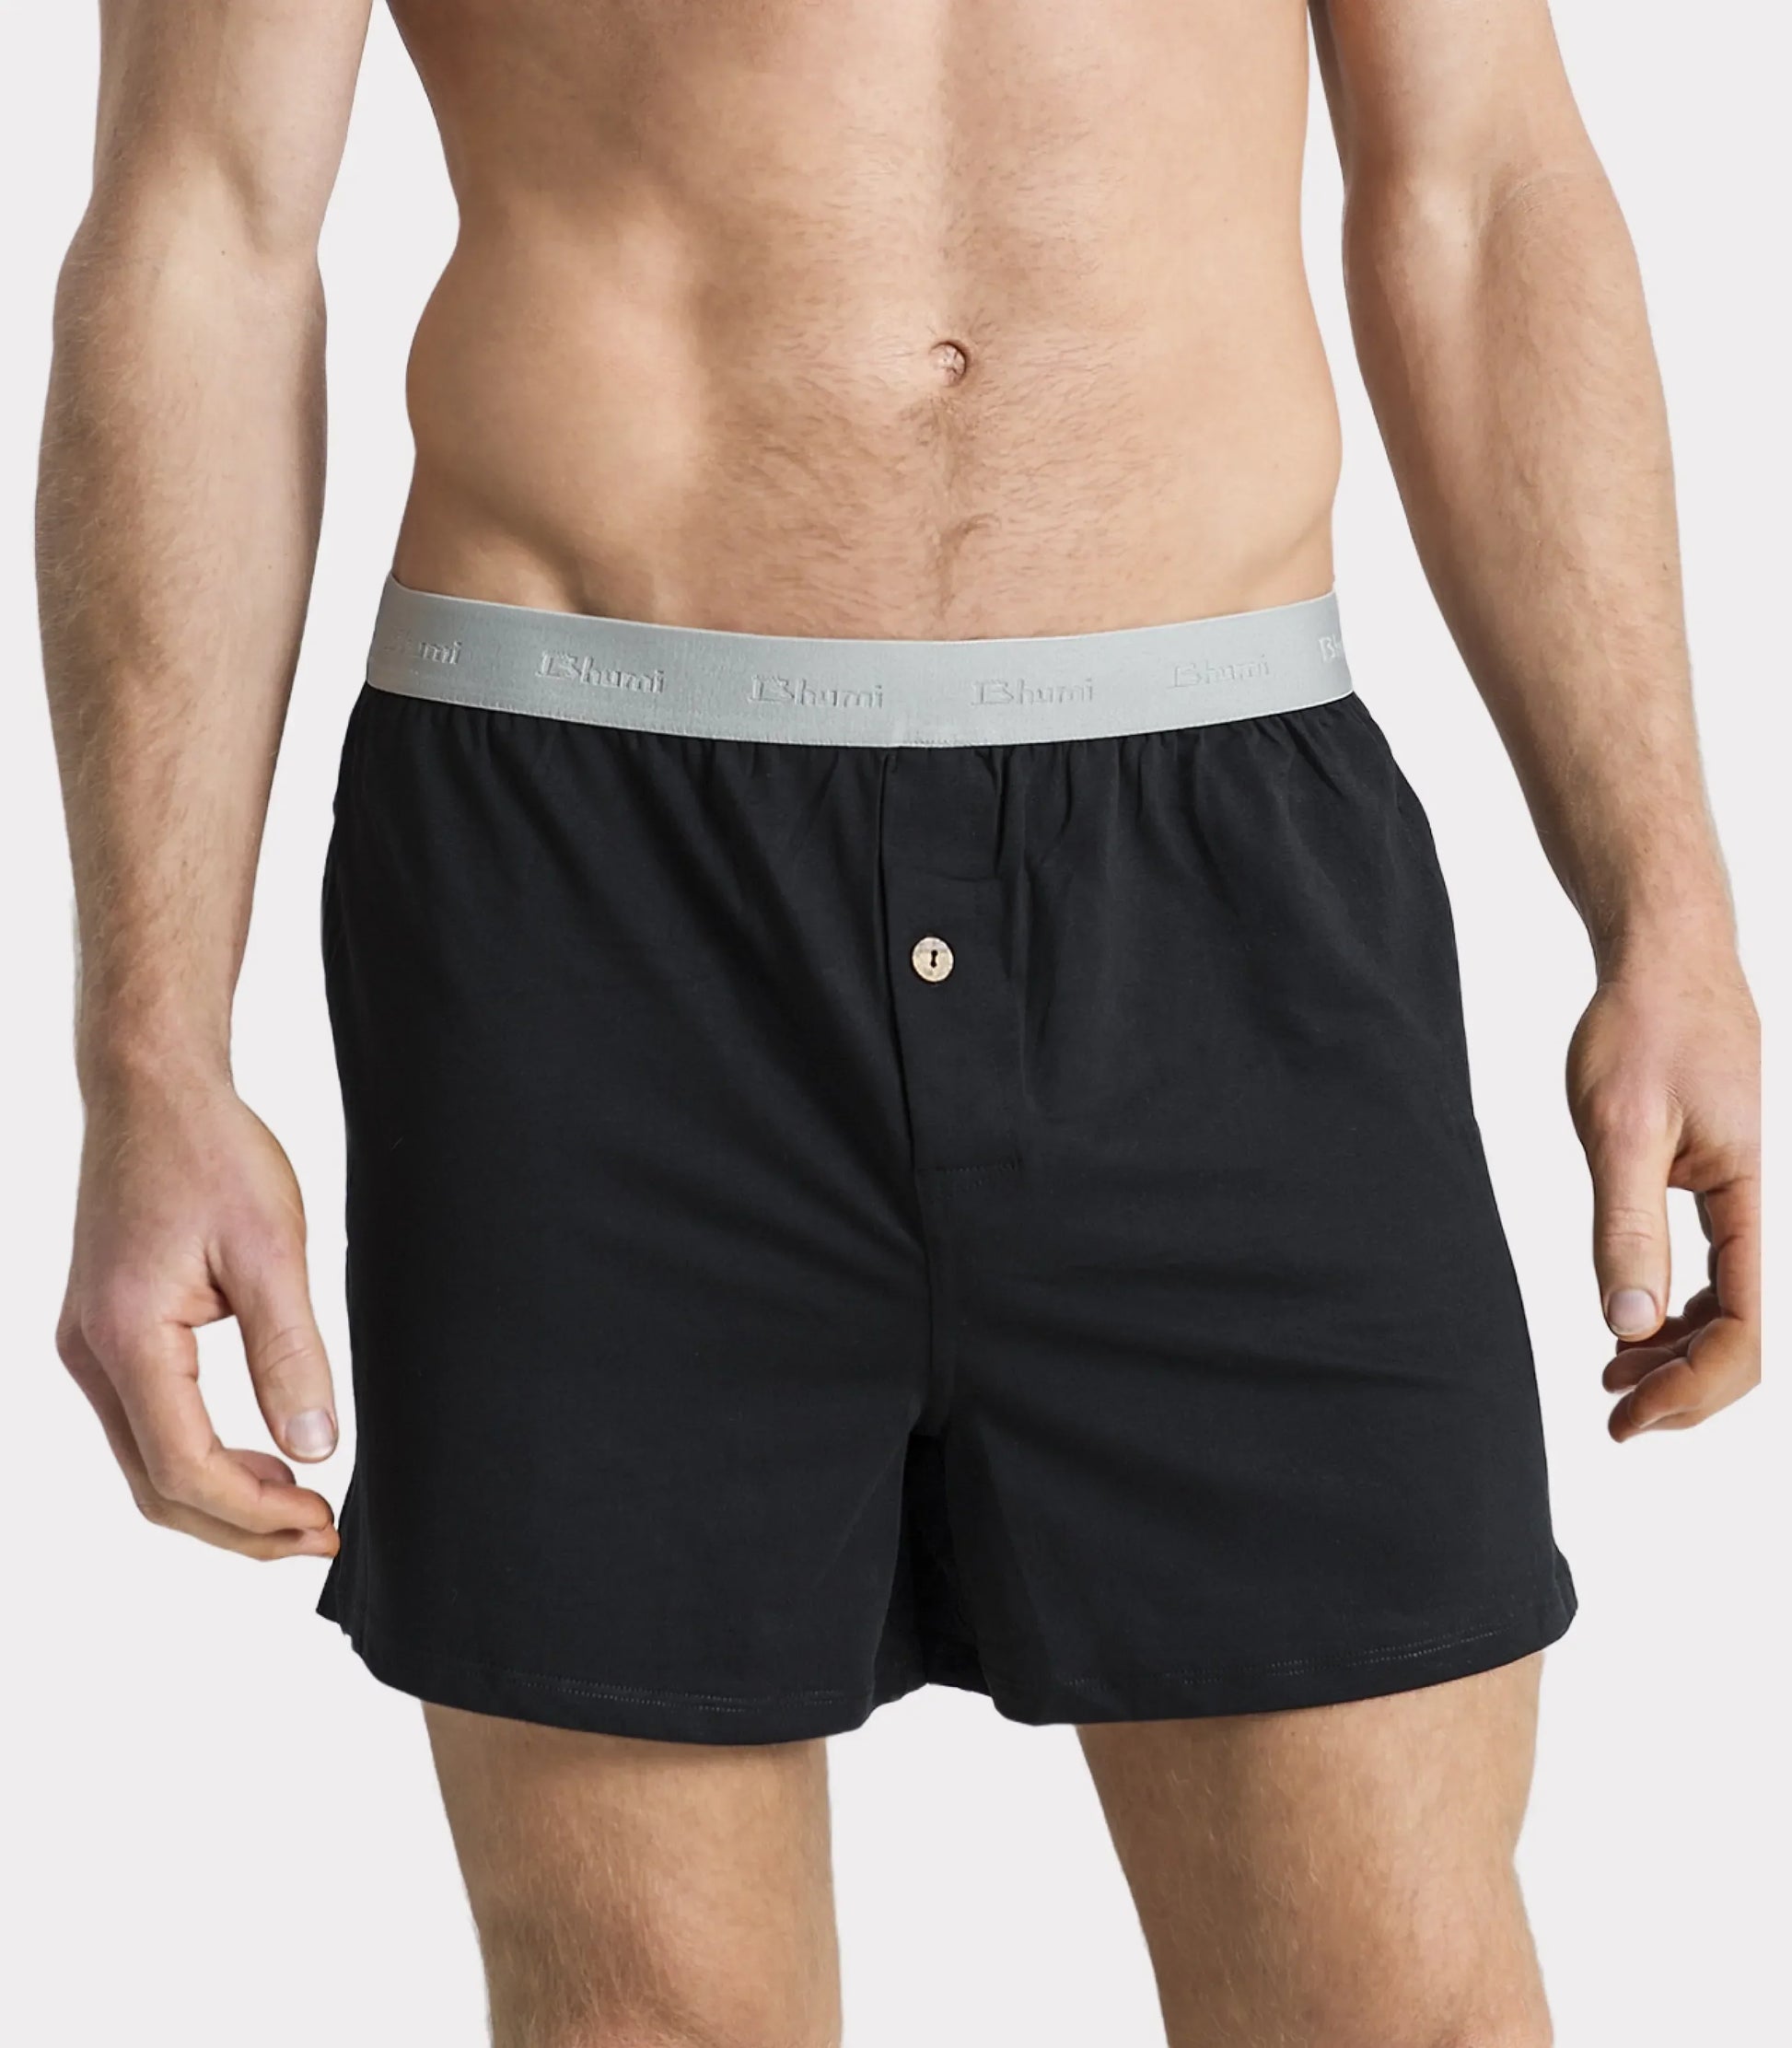 Bhumi Organic Cotton - Must Have Boxers (6 Pack)